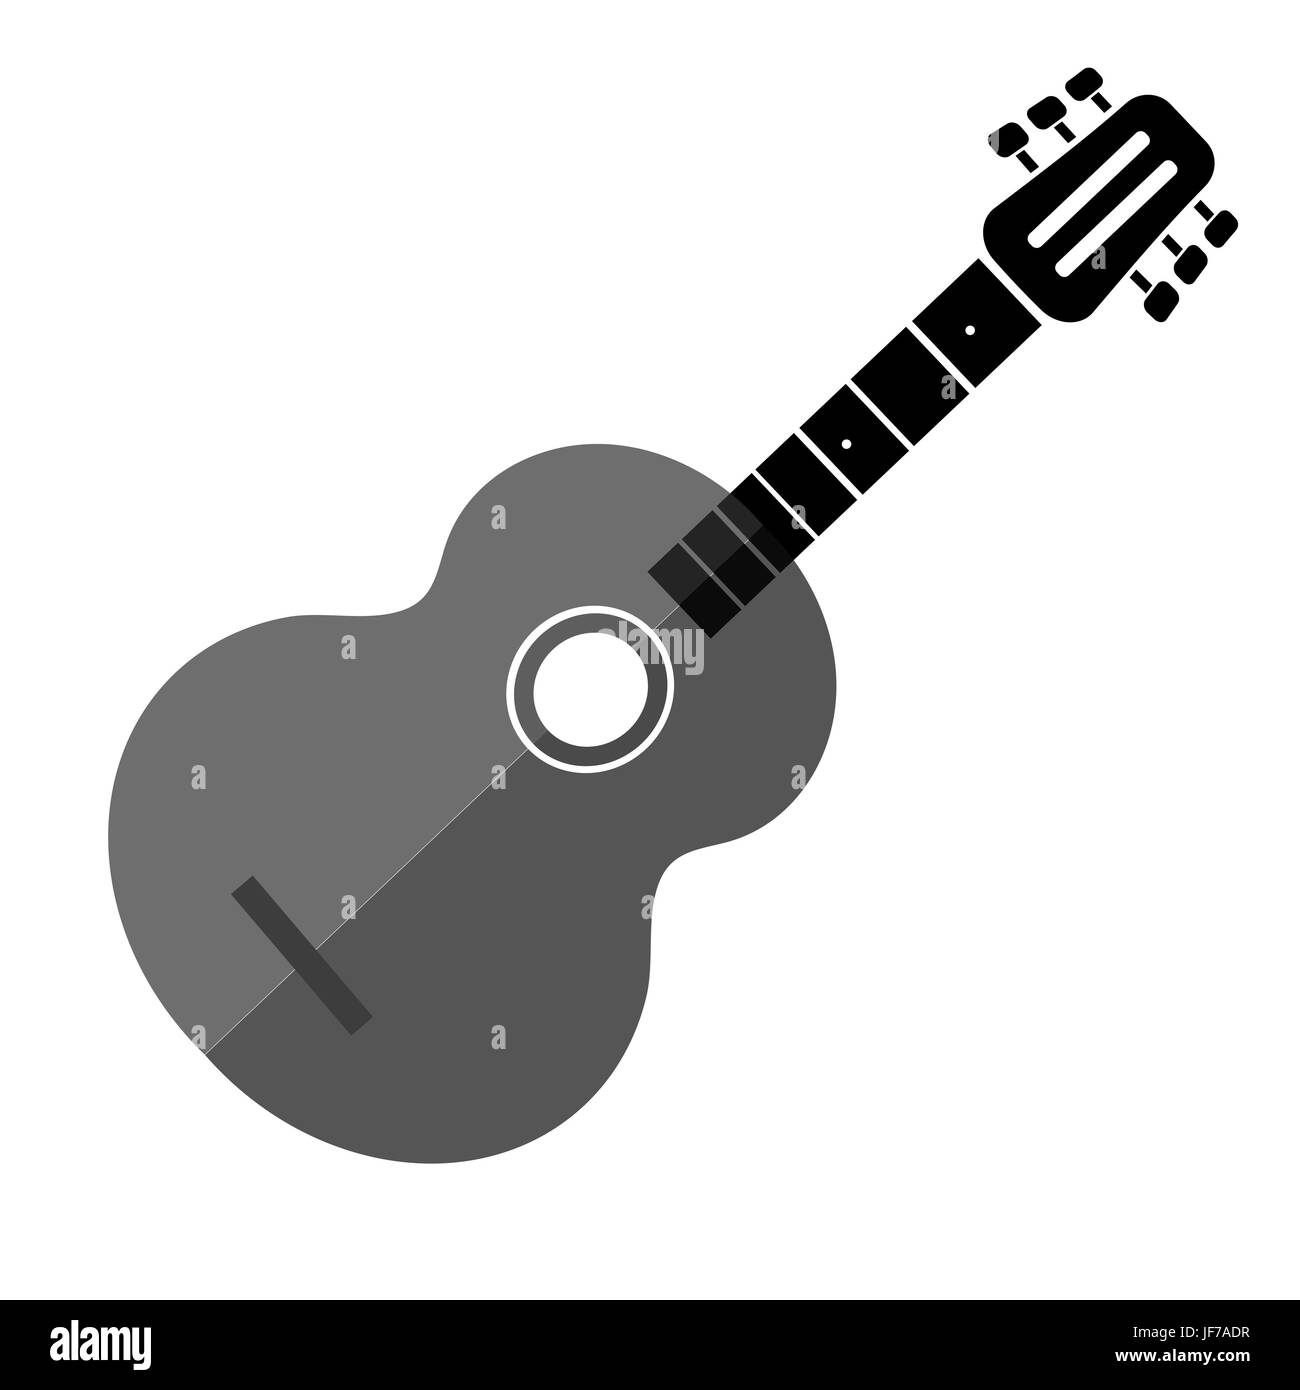 Silhoiette of Guitar Isolated on White Background Stock Vector